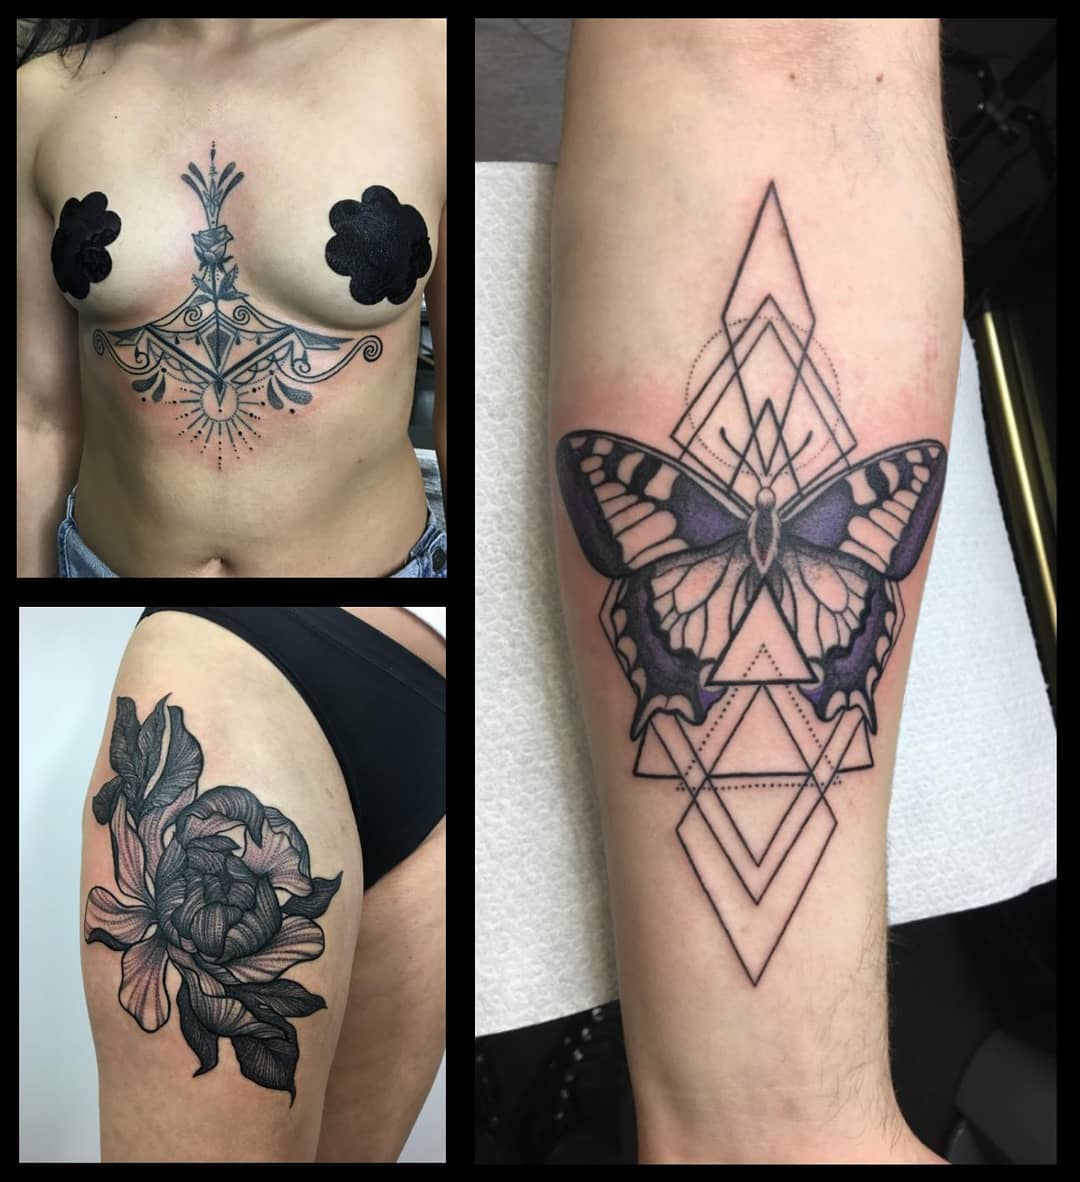 Wee selection of tattoos that Caterina has done during her guest spot at Watermelon Tattoo!
